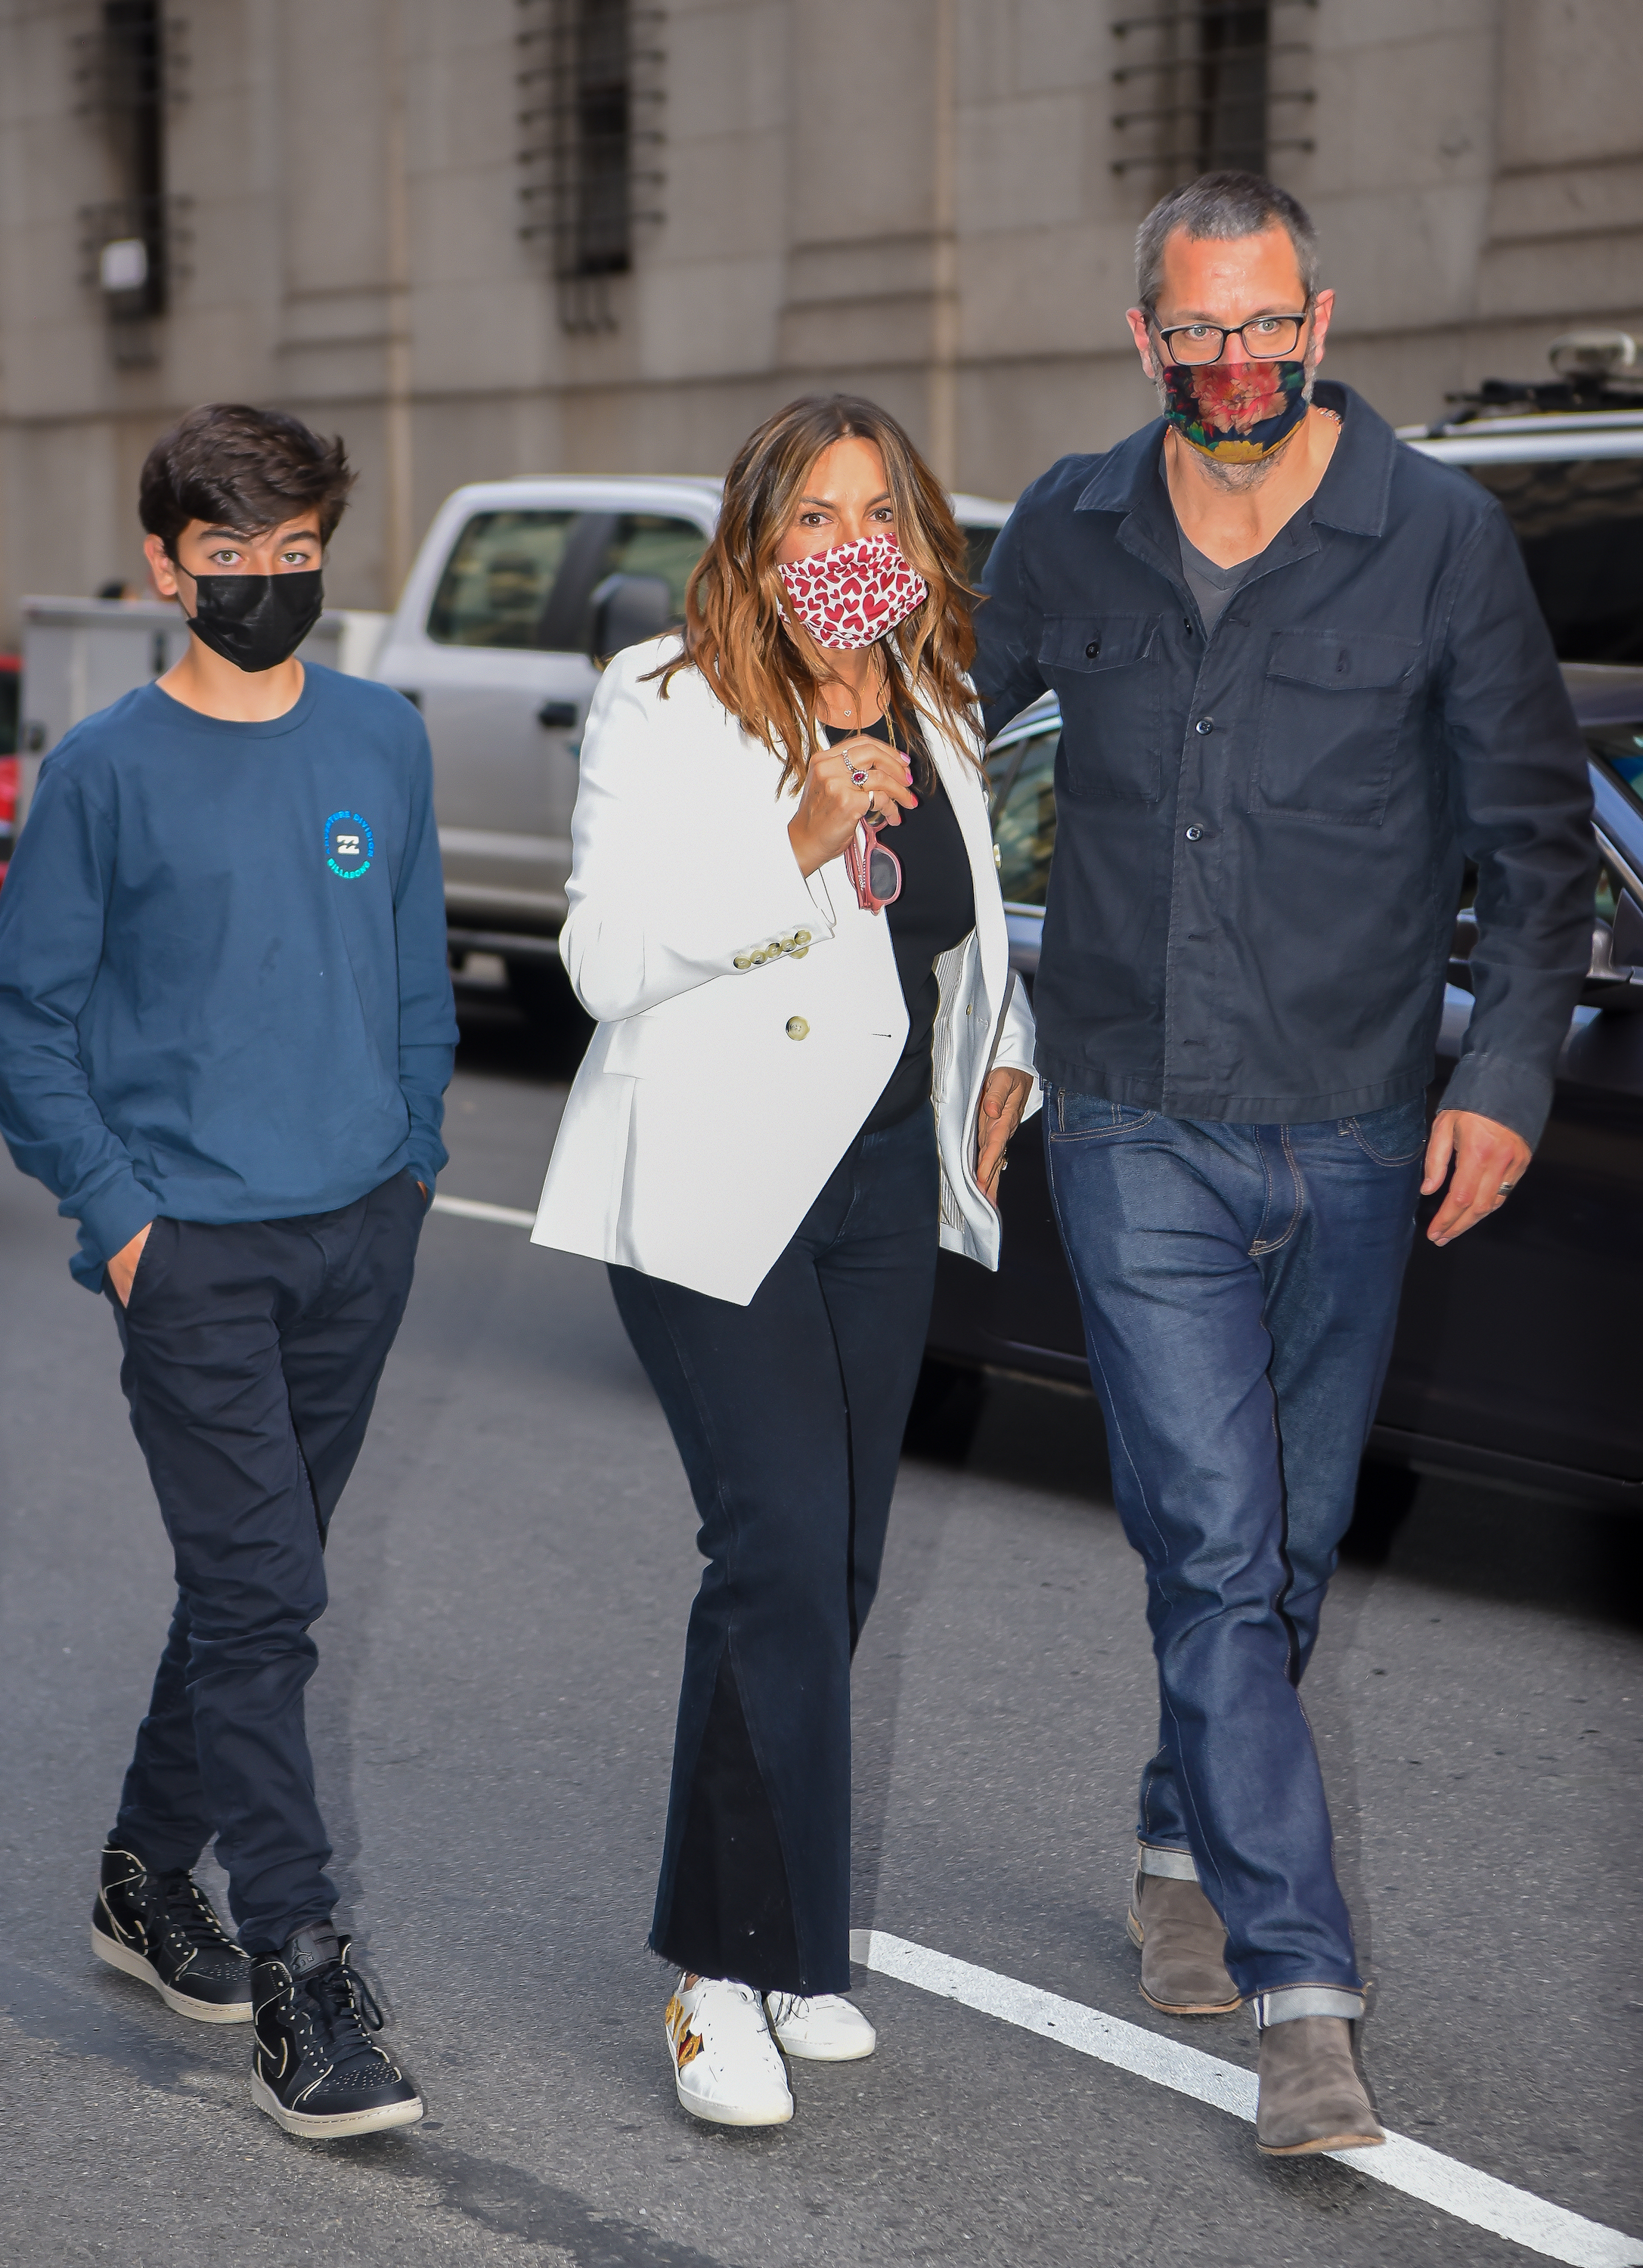 August Miklos Friedrich Hermann, Mariska Hargitay, and Peter Hermann spotted in New York City on June 2, 2021 | Source: Getty Images